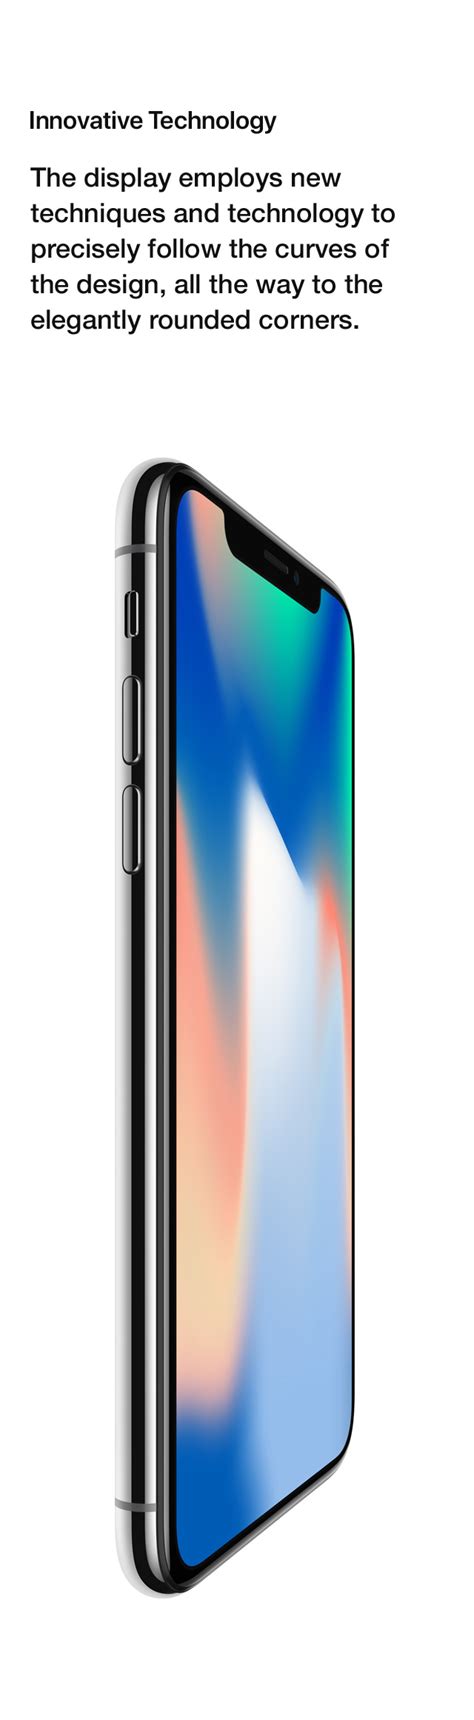 Looking for good quality iphone x u mobile at the lowest prices? iPhone X: Portail my.t mobile - île Maurice